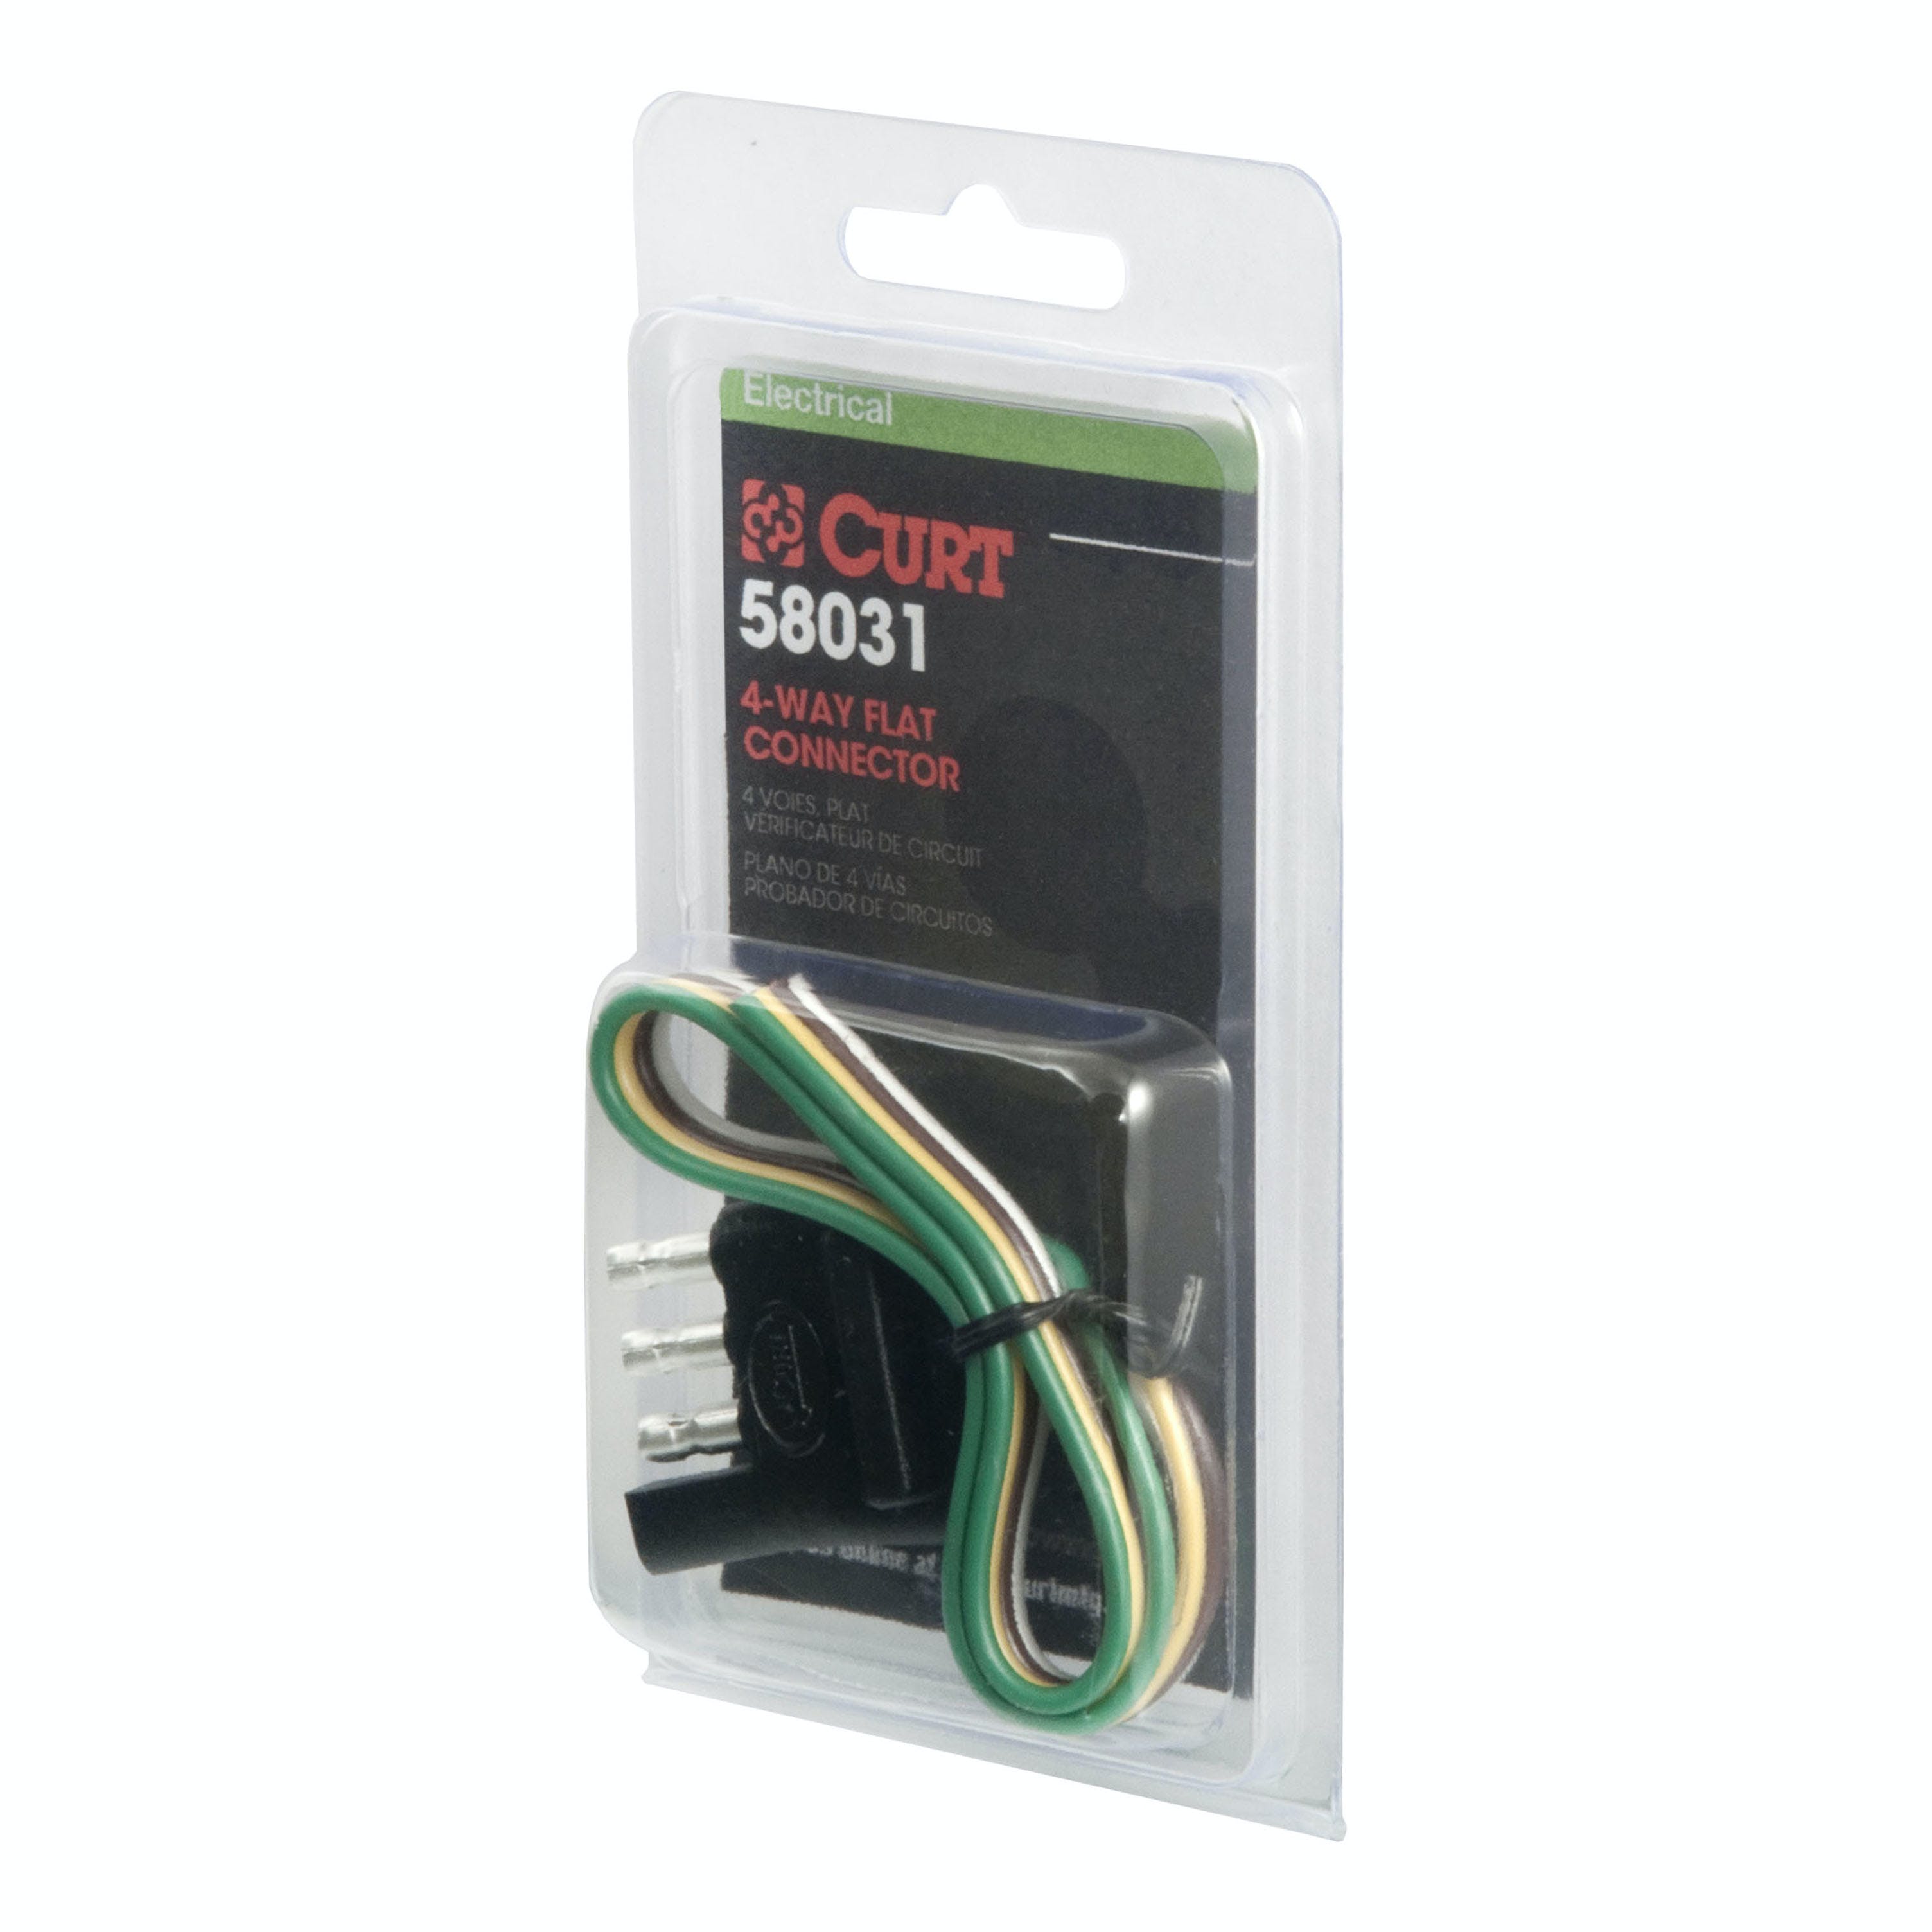 CURT 58031 4-Way Flat Connector Plug with 12 Wires (Trailer Side, Packaged)